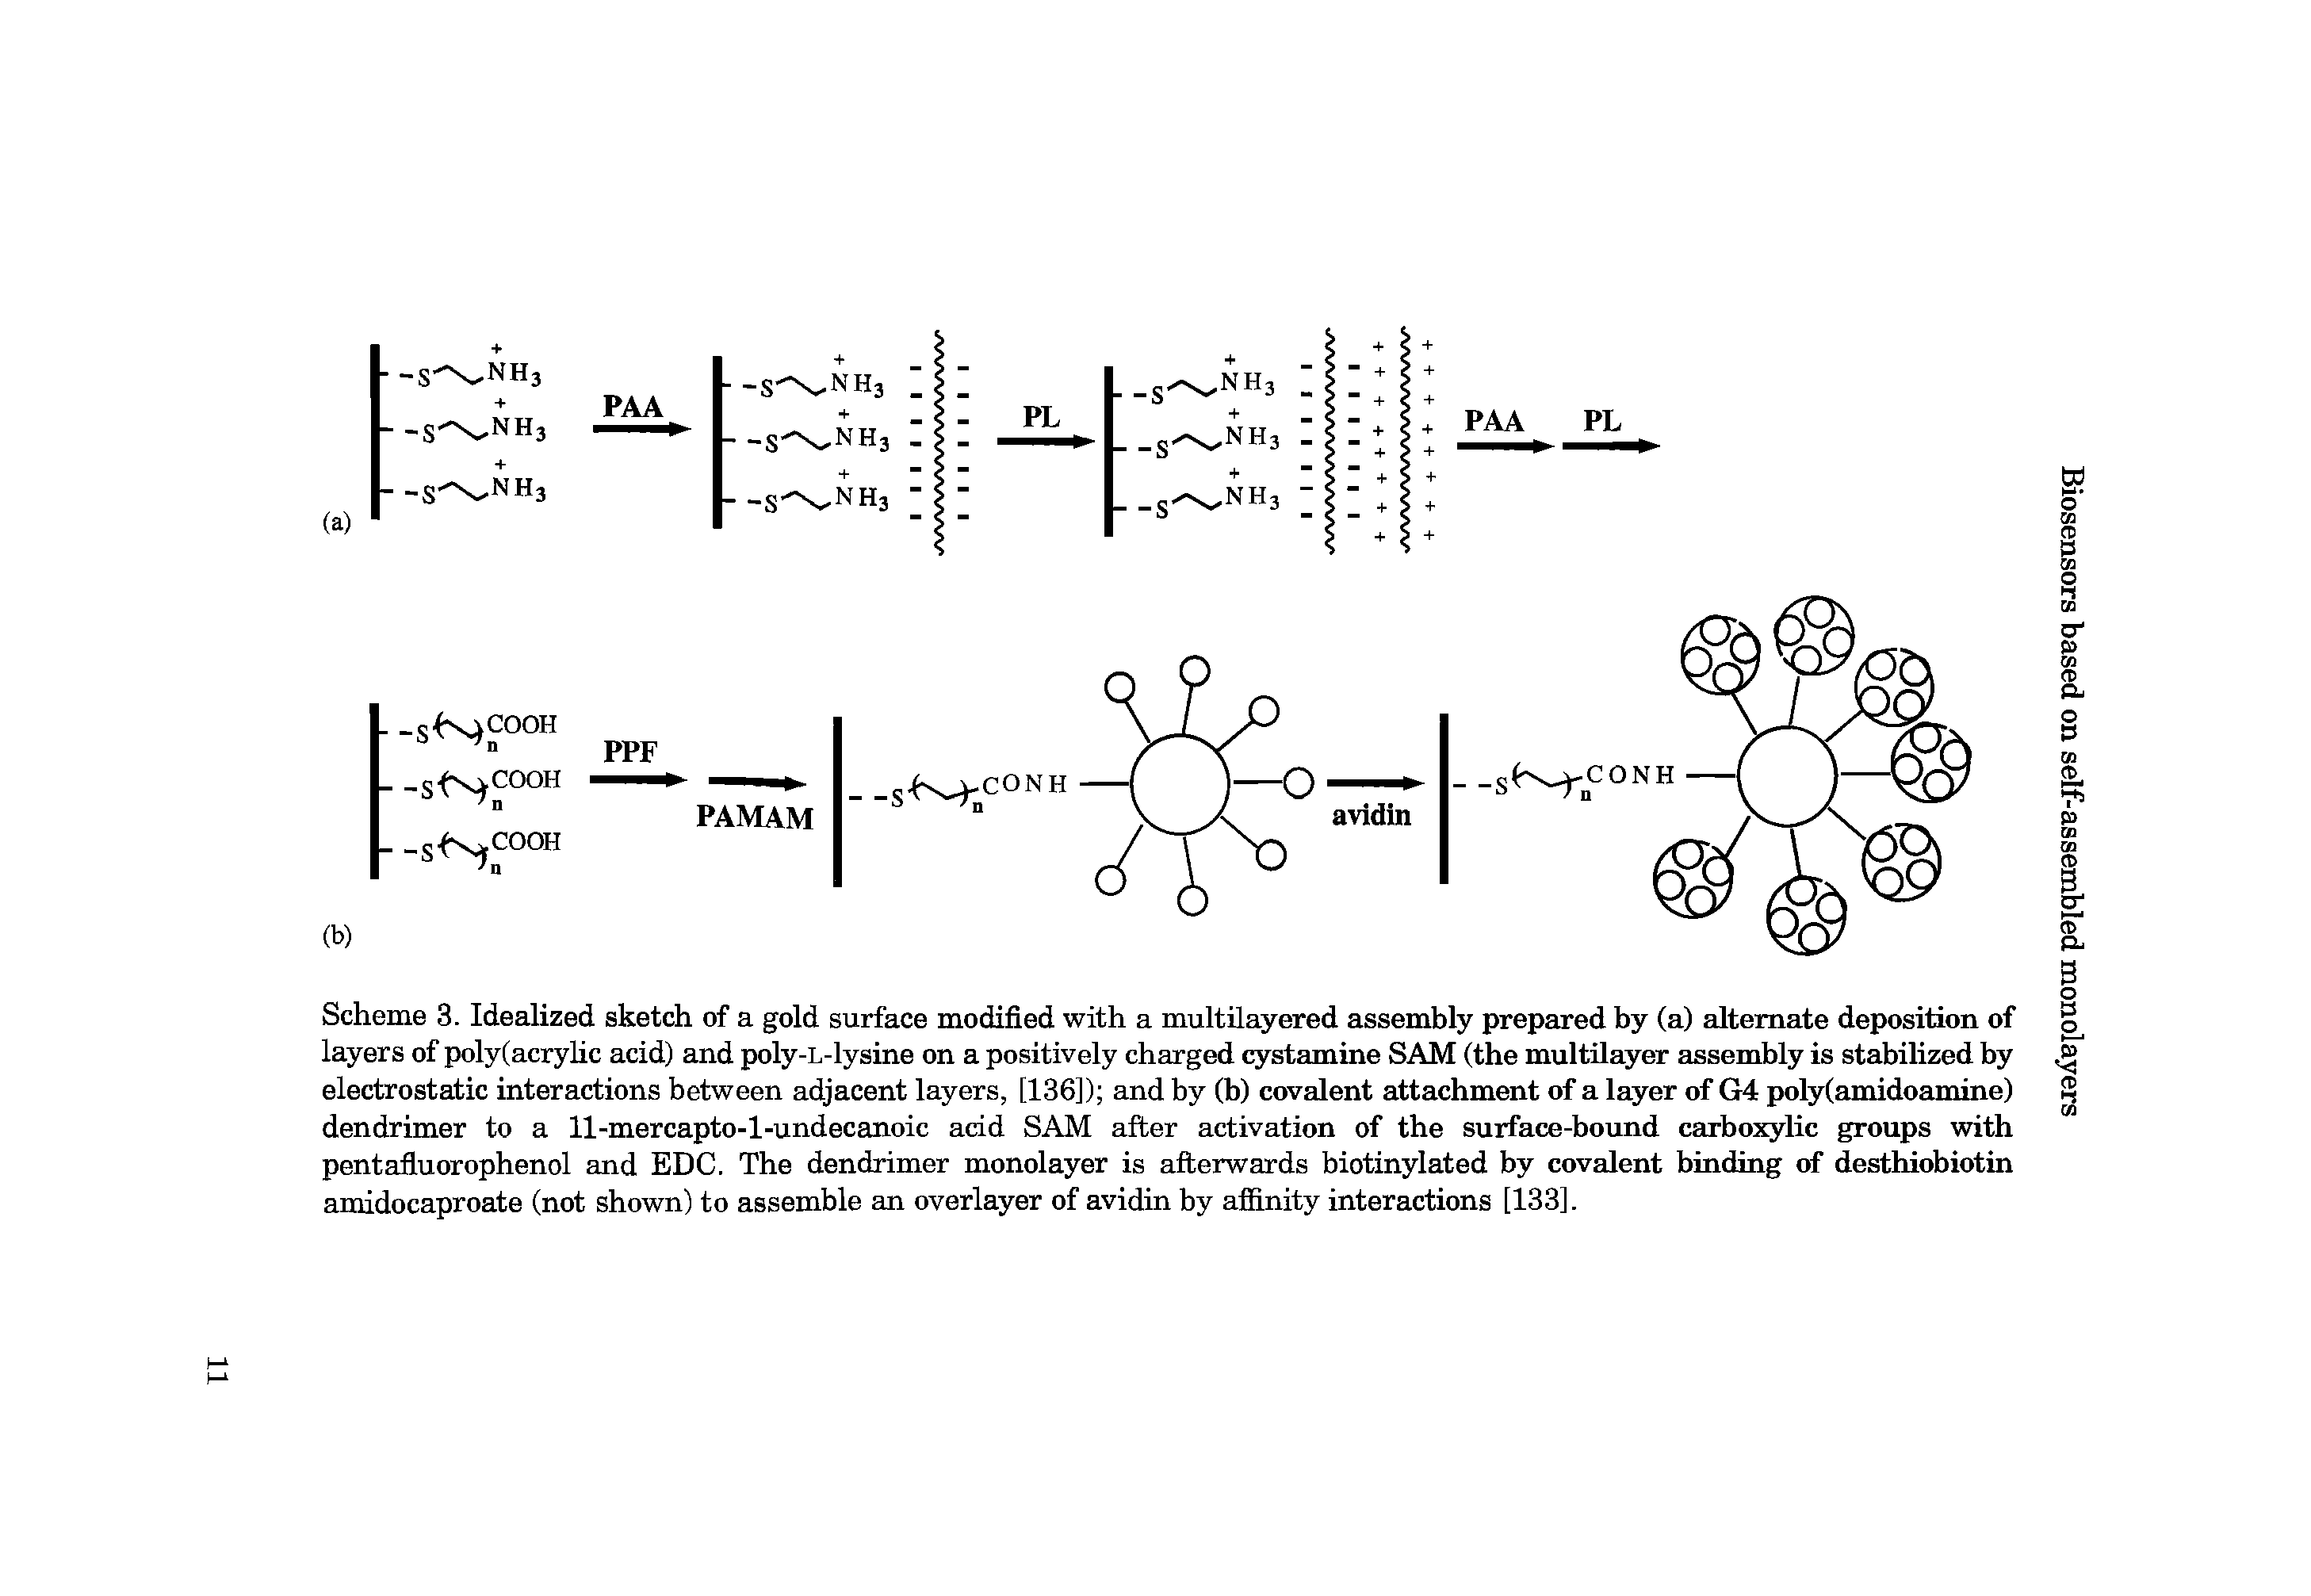 Scheme 3. Idealized sketch of a gold surface modified with a multilayered assembly prepared by (a) alternate deposition of layers of poly(acryhc acid) and poly-L-lysine on a positively charged cystamine SAM (the multilayer assembly is stabilized by electrostatic interactions between adjacent layers, [136]) and by (b) covalent attachment of a layer of G4 poly(amidoamine) dendrimer to a 11-mercapto-l-undecanoic acid SAM after activation of the surface-bound cEirboxylic groups with pentafiuorophenol and EDC. The dendrimer monolayer is afterwards biotinylated by covalent binding of desthiobiotin amidocaproate (not shown) to assemble an overlayer of avidin by affinity interactions [133].